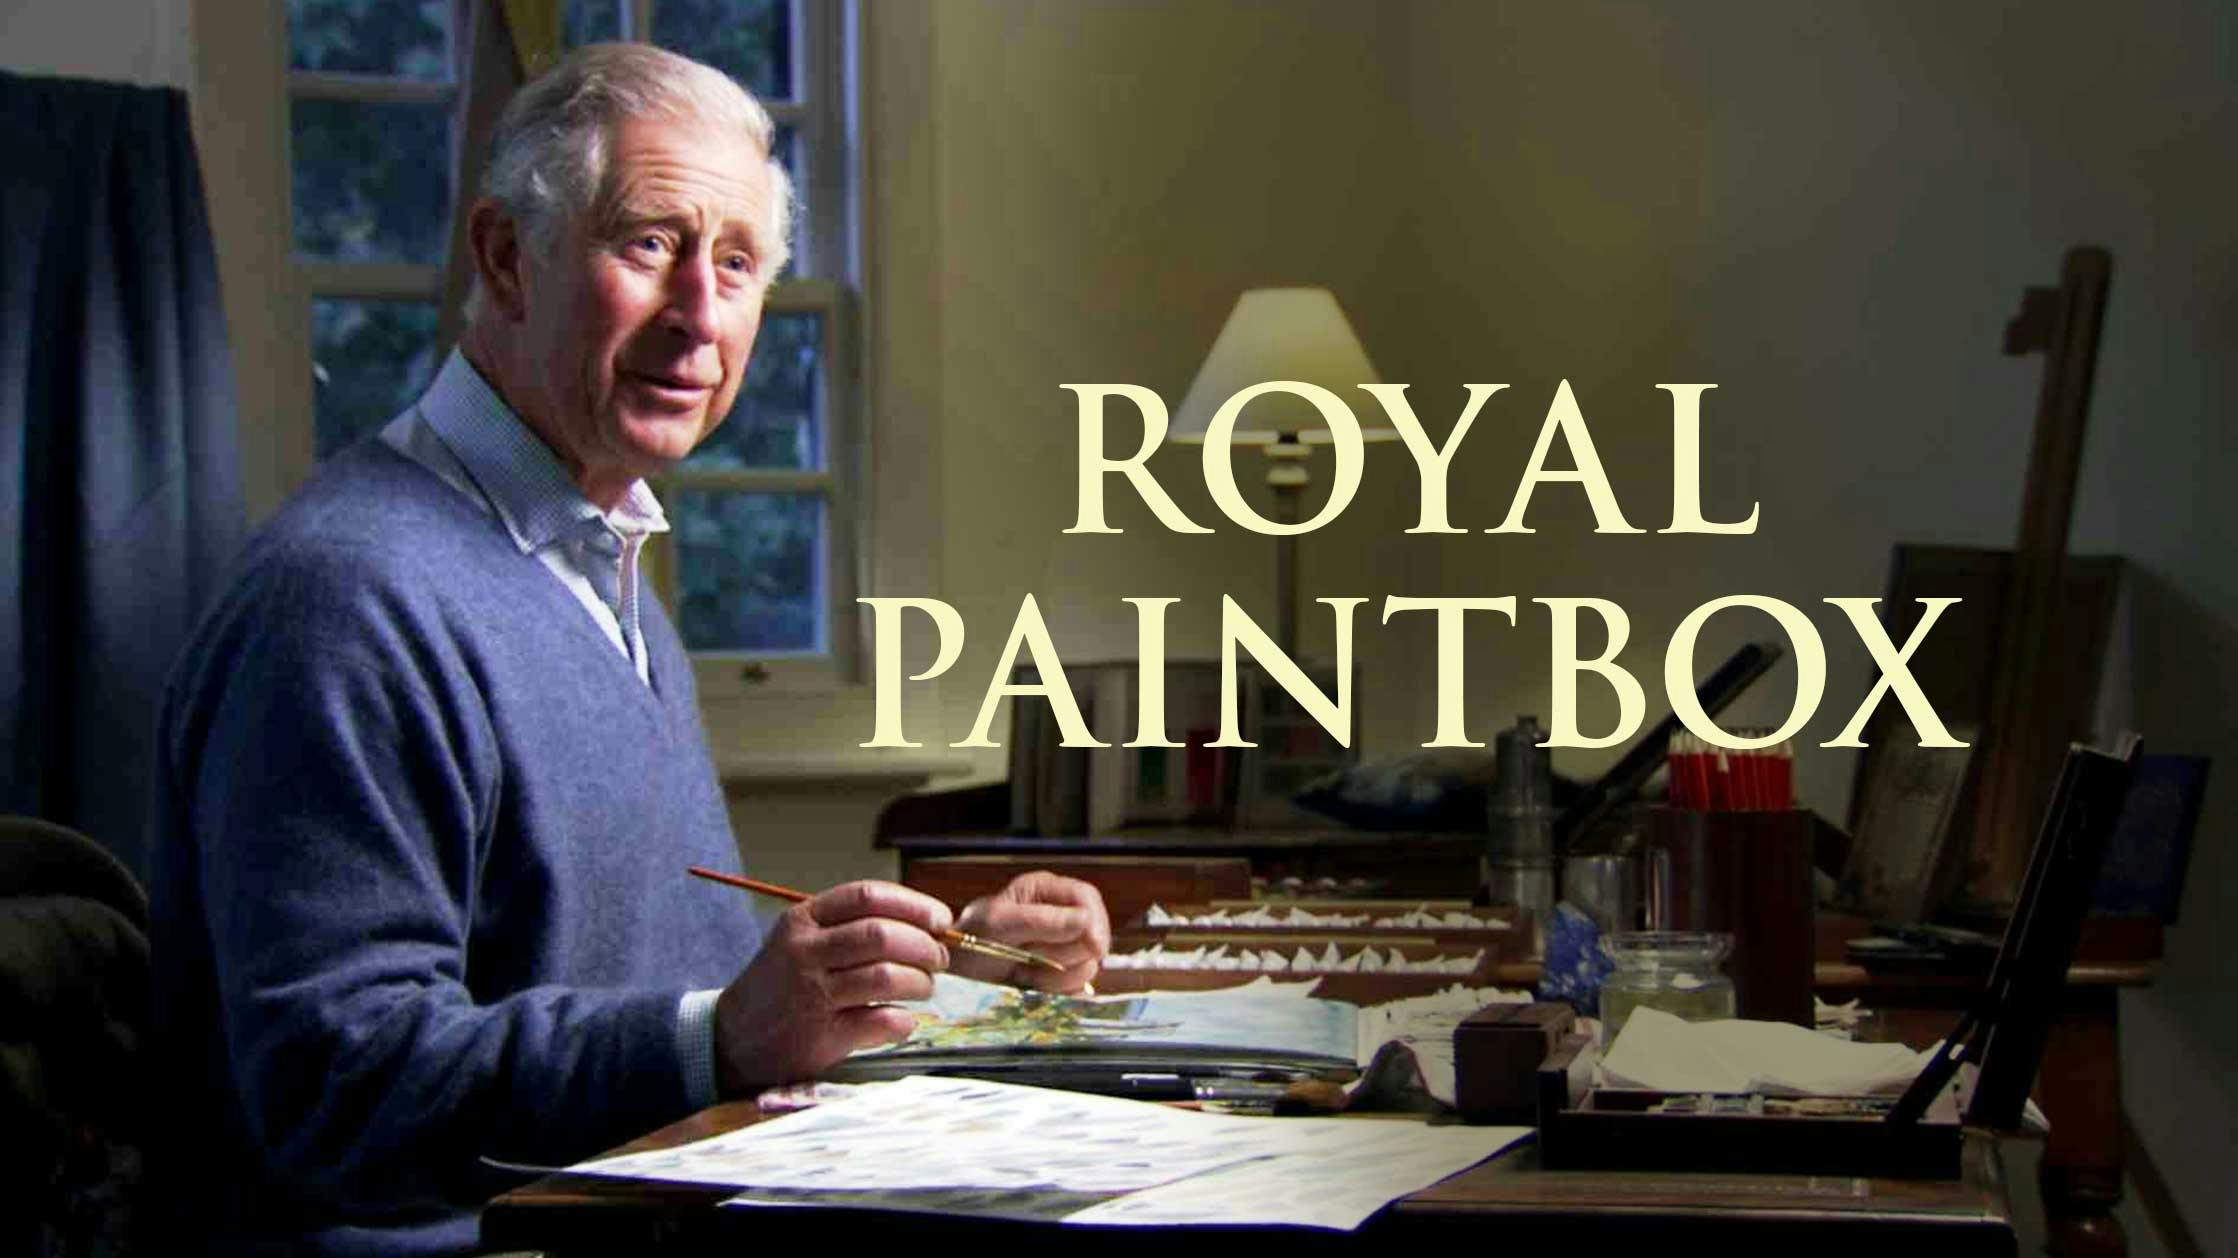 Royal Paintbox